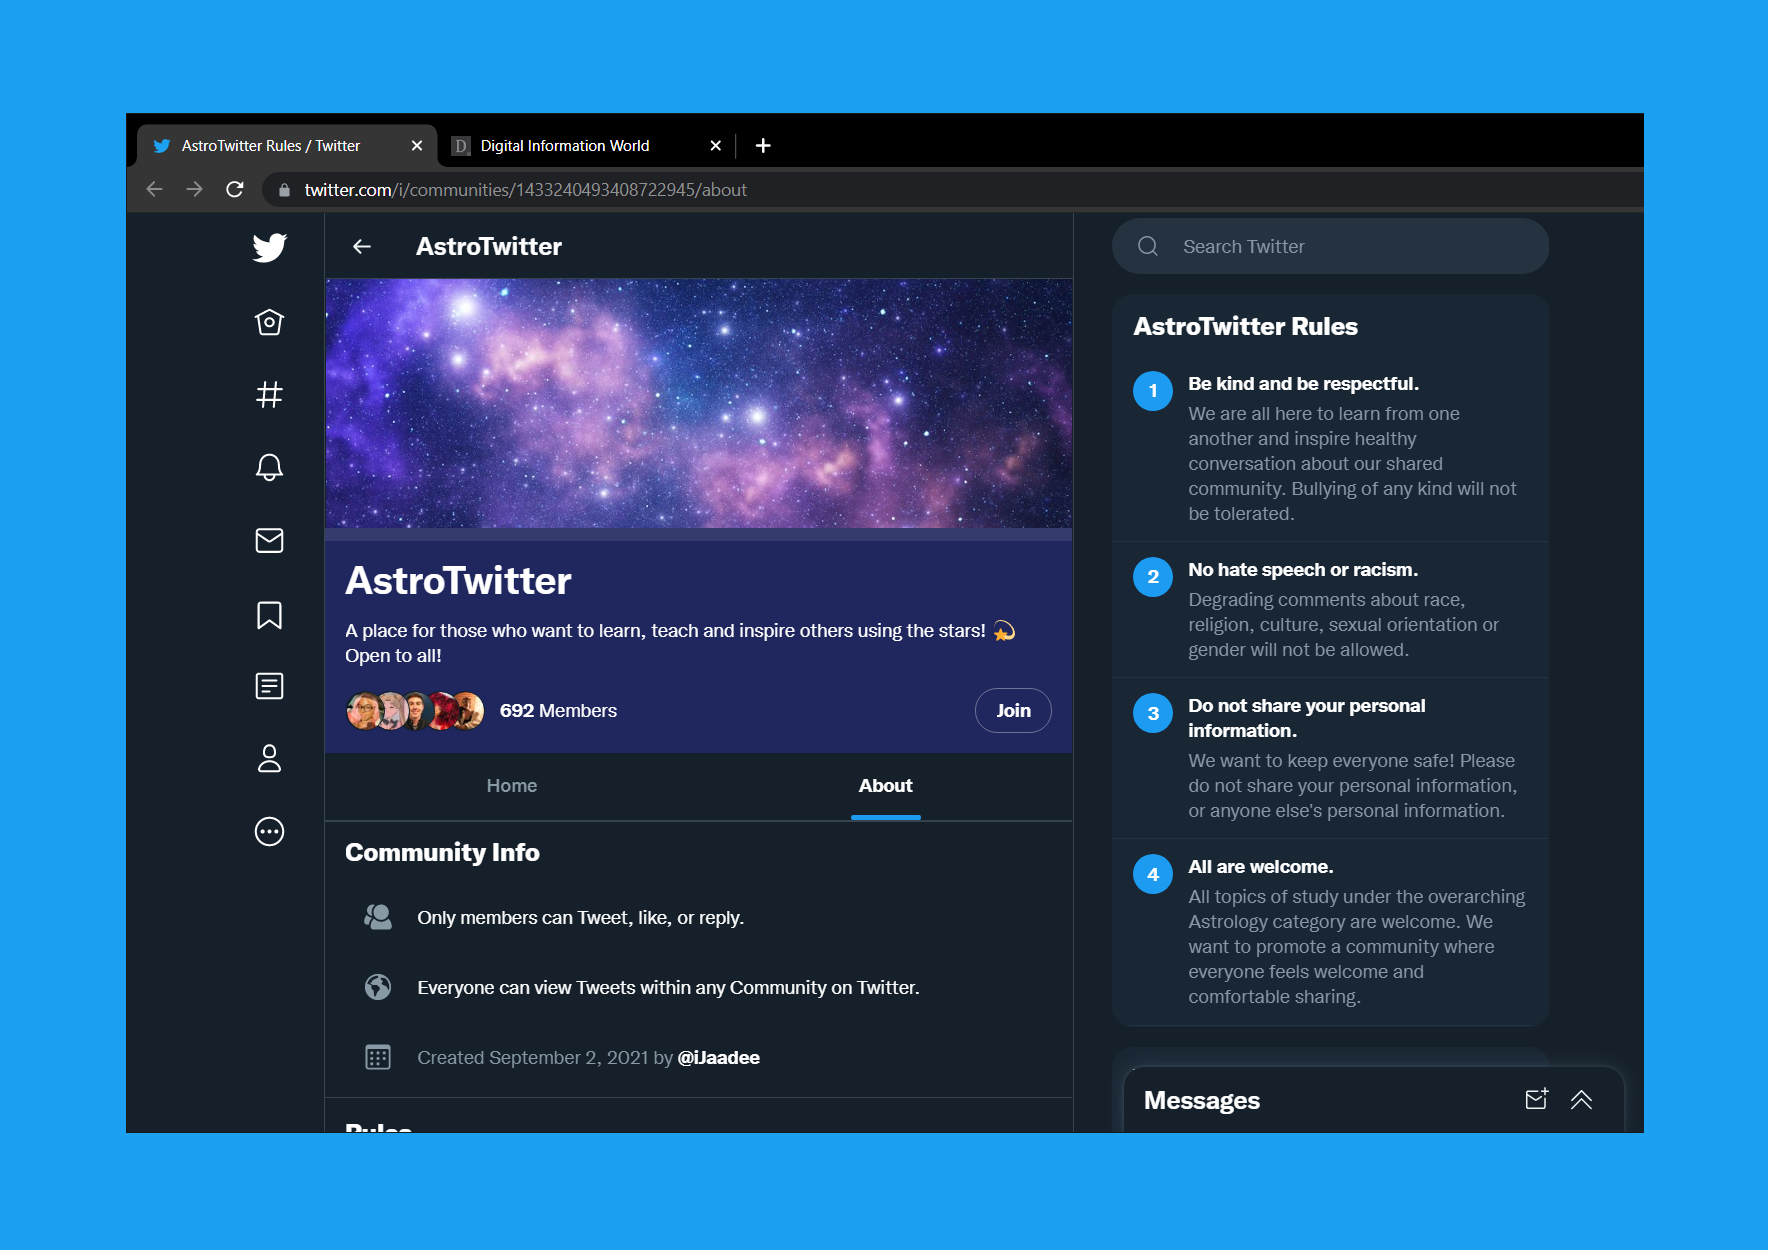 Twitter Introduces A New Communities Feature To Engage Users Digital Information World